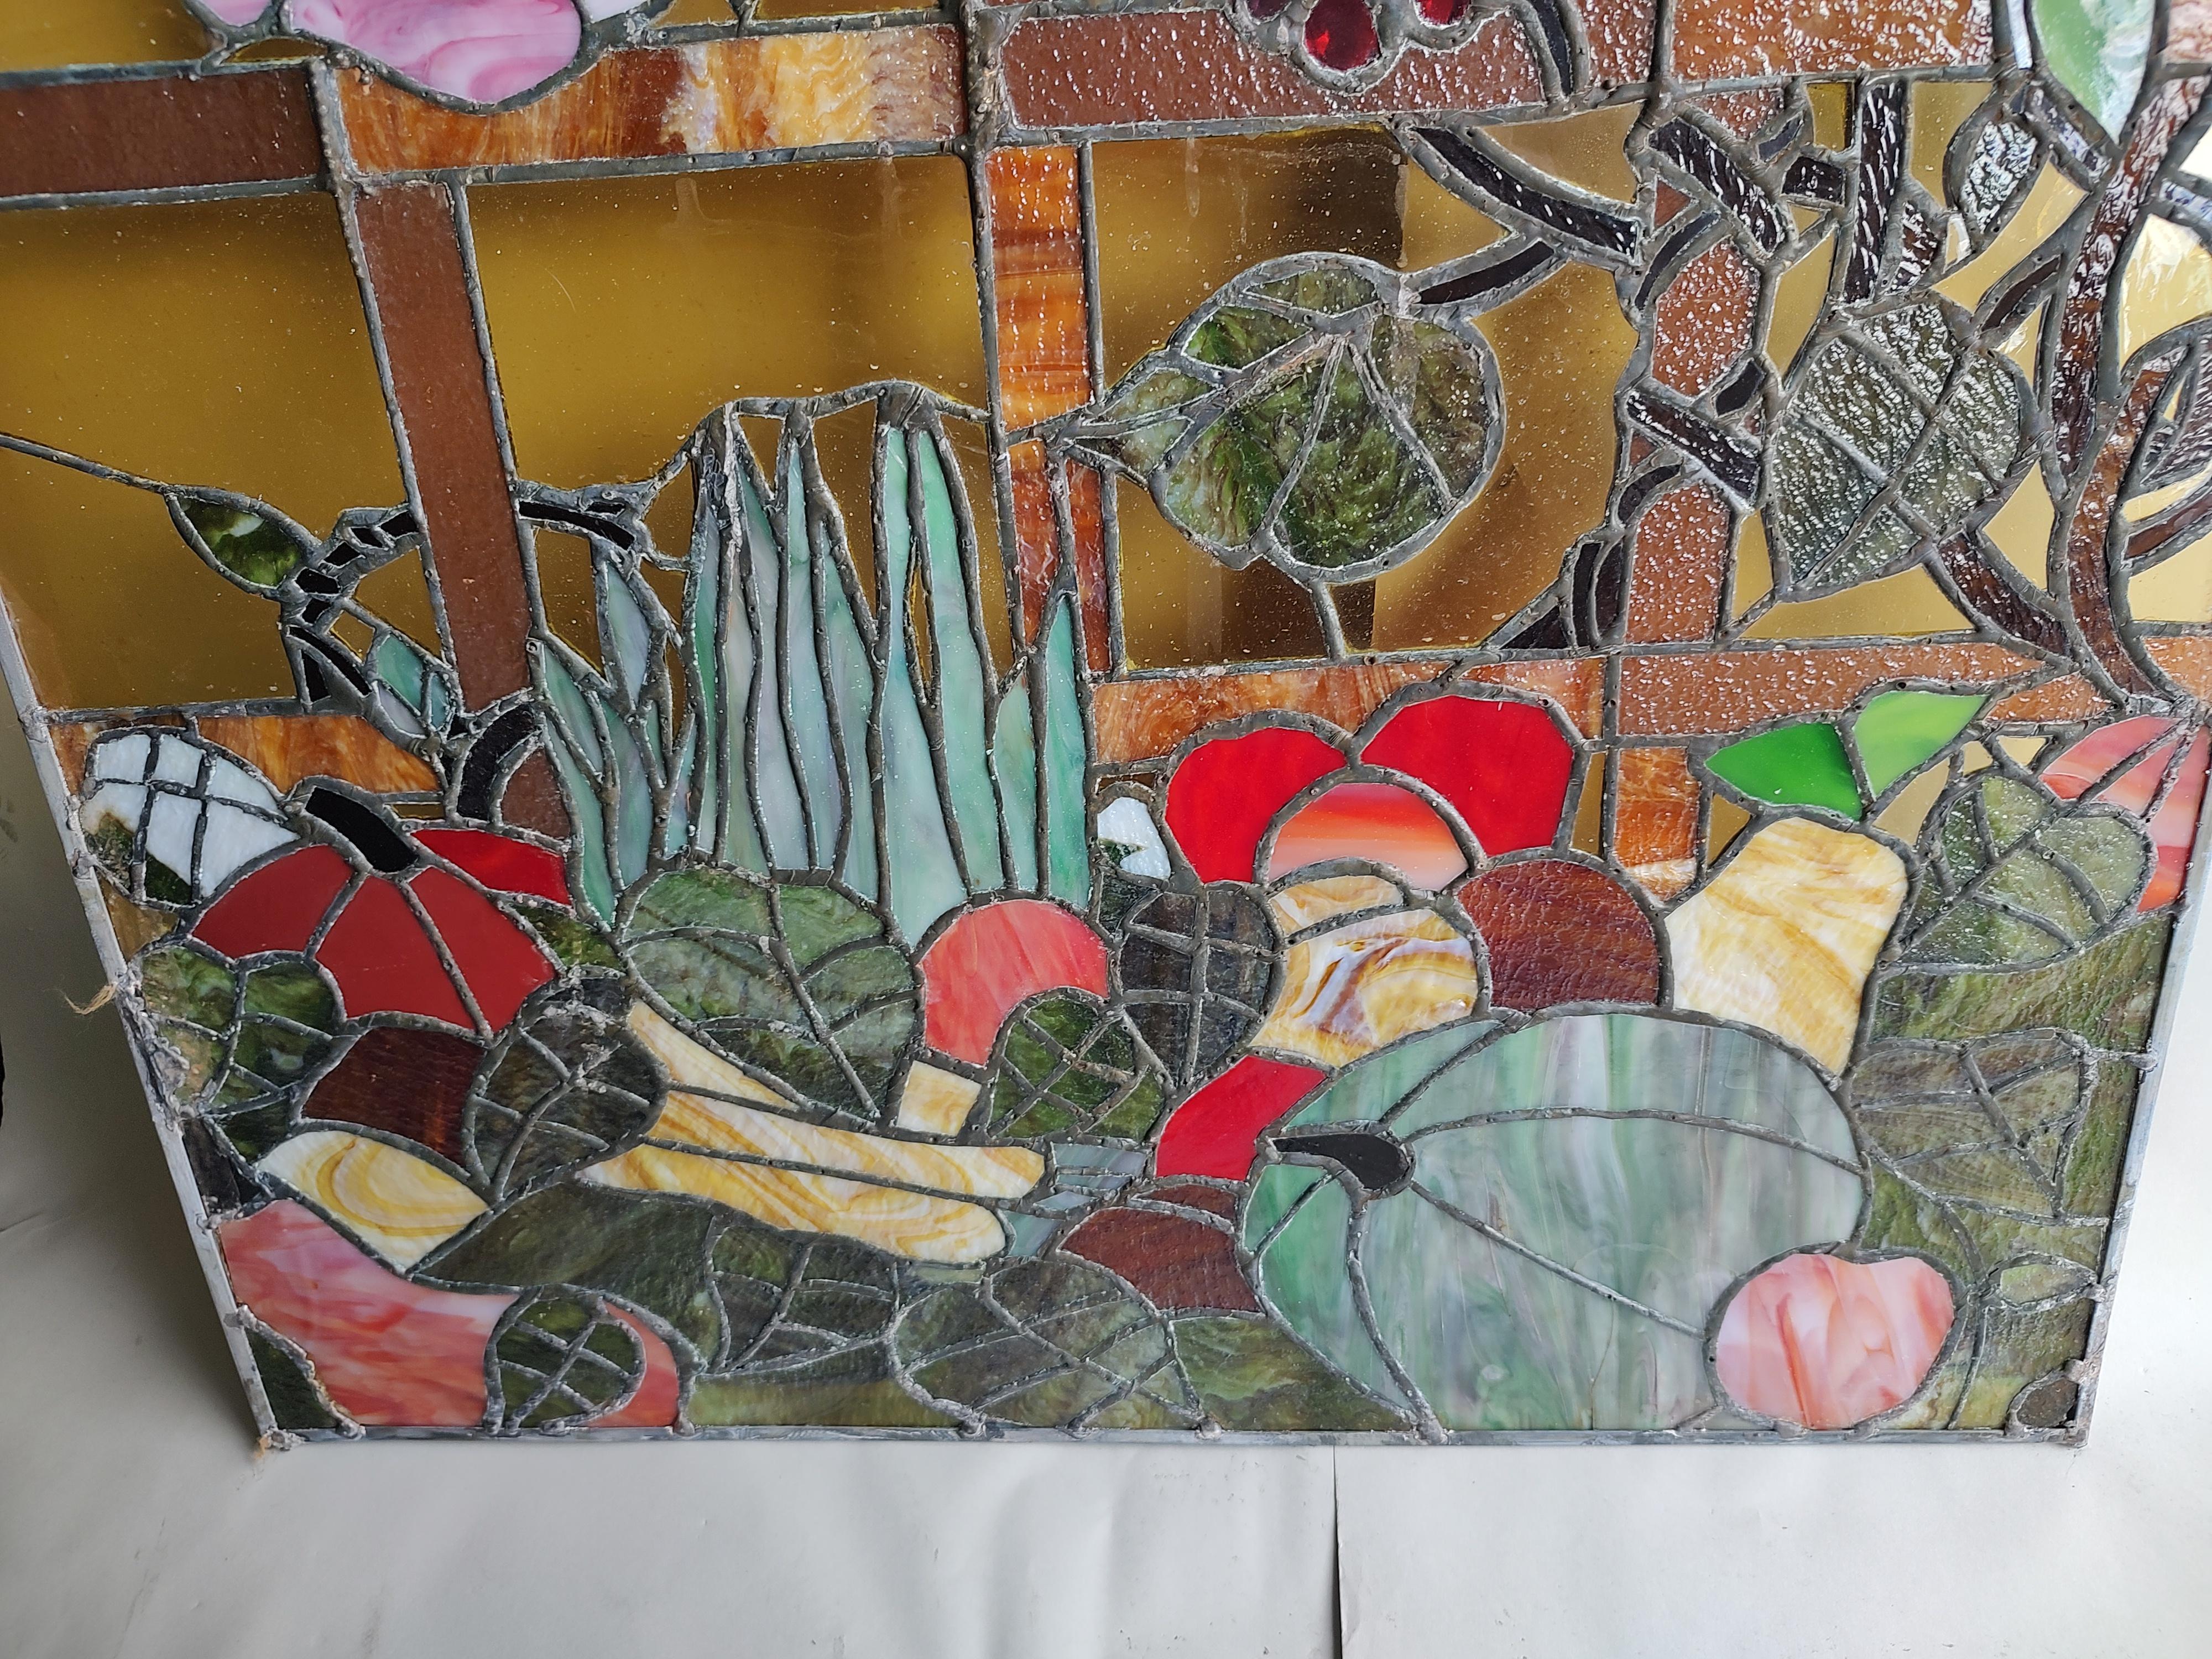 Mid-Century Modern adaption of stained glass window panels by Rainbow Studios NY. 6 available just one in this listing, see other listings for the entire collection. Amazing craftsmanship and style in these panels, beautiful colors filtering thru